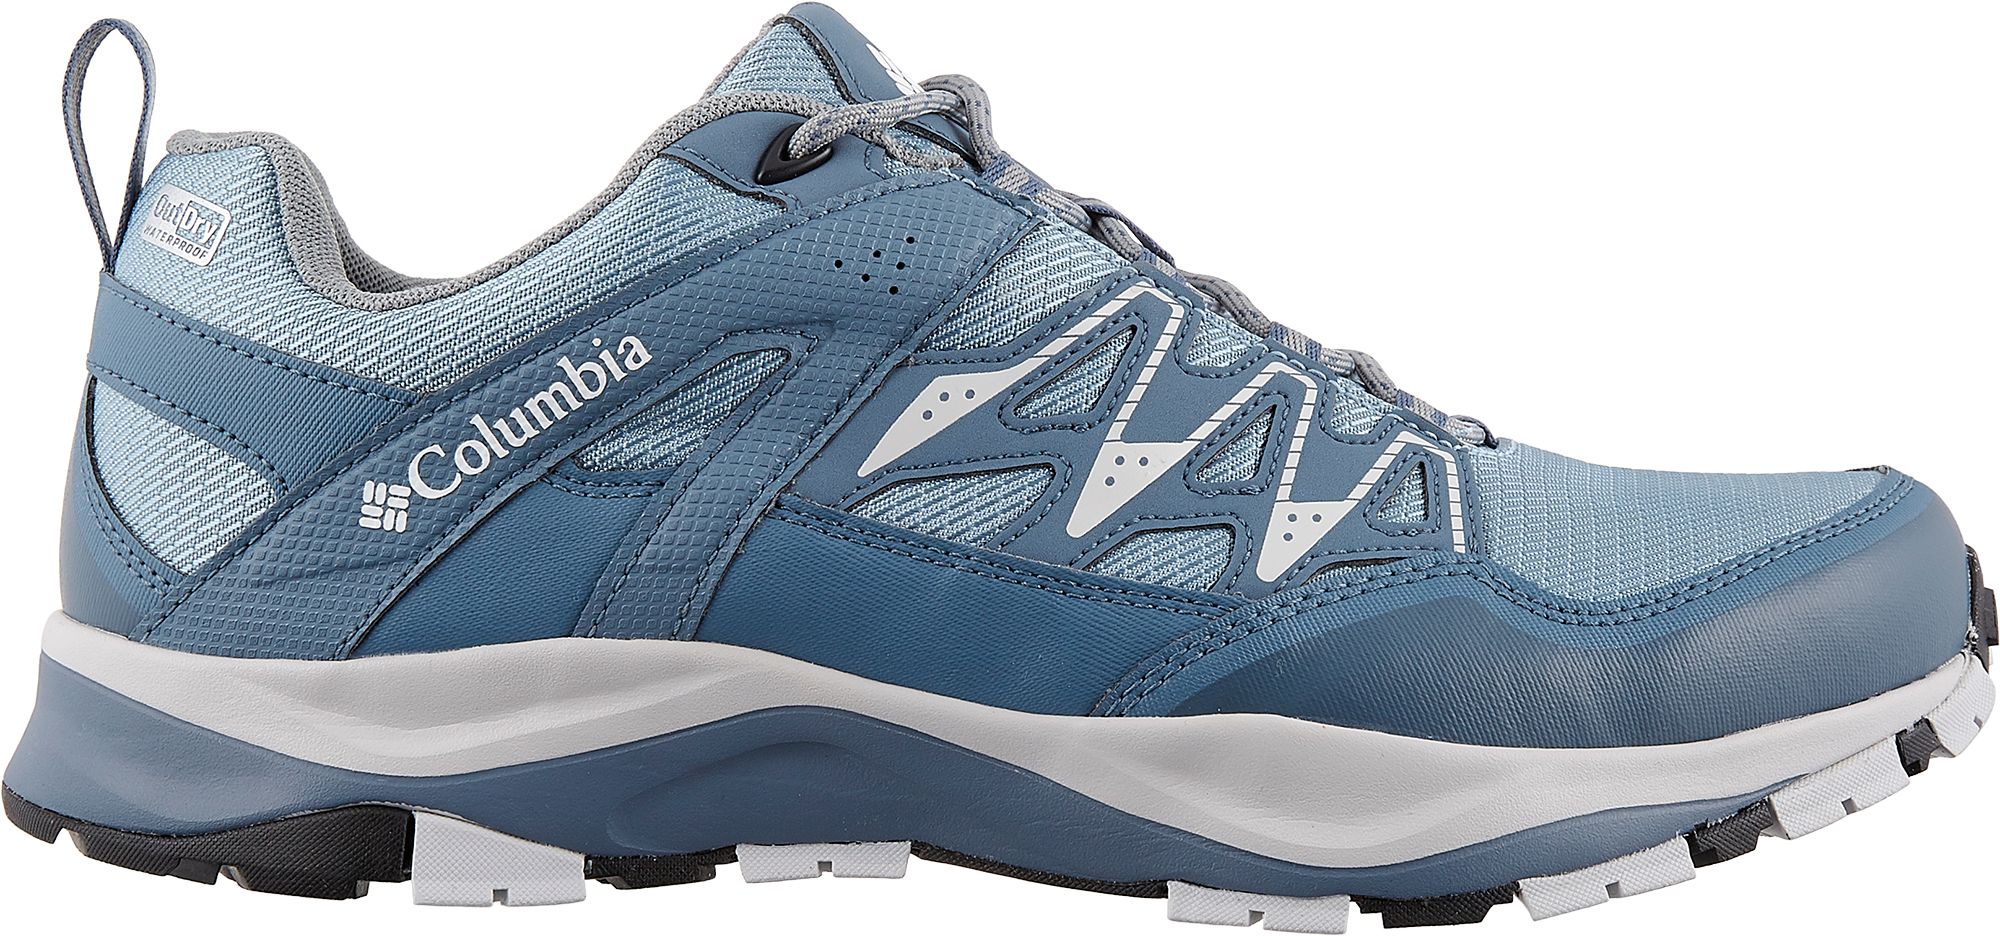 columbia shoes